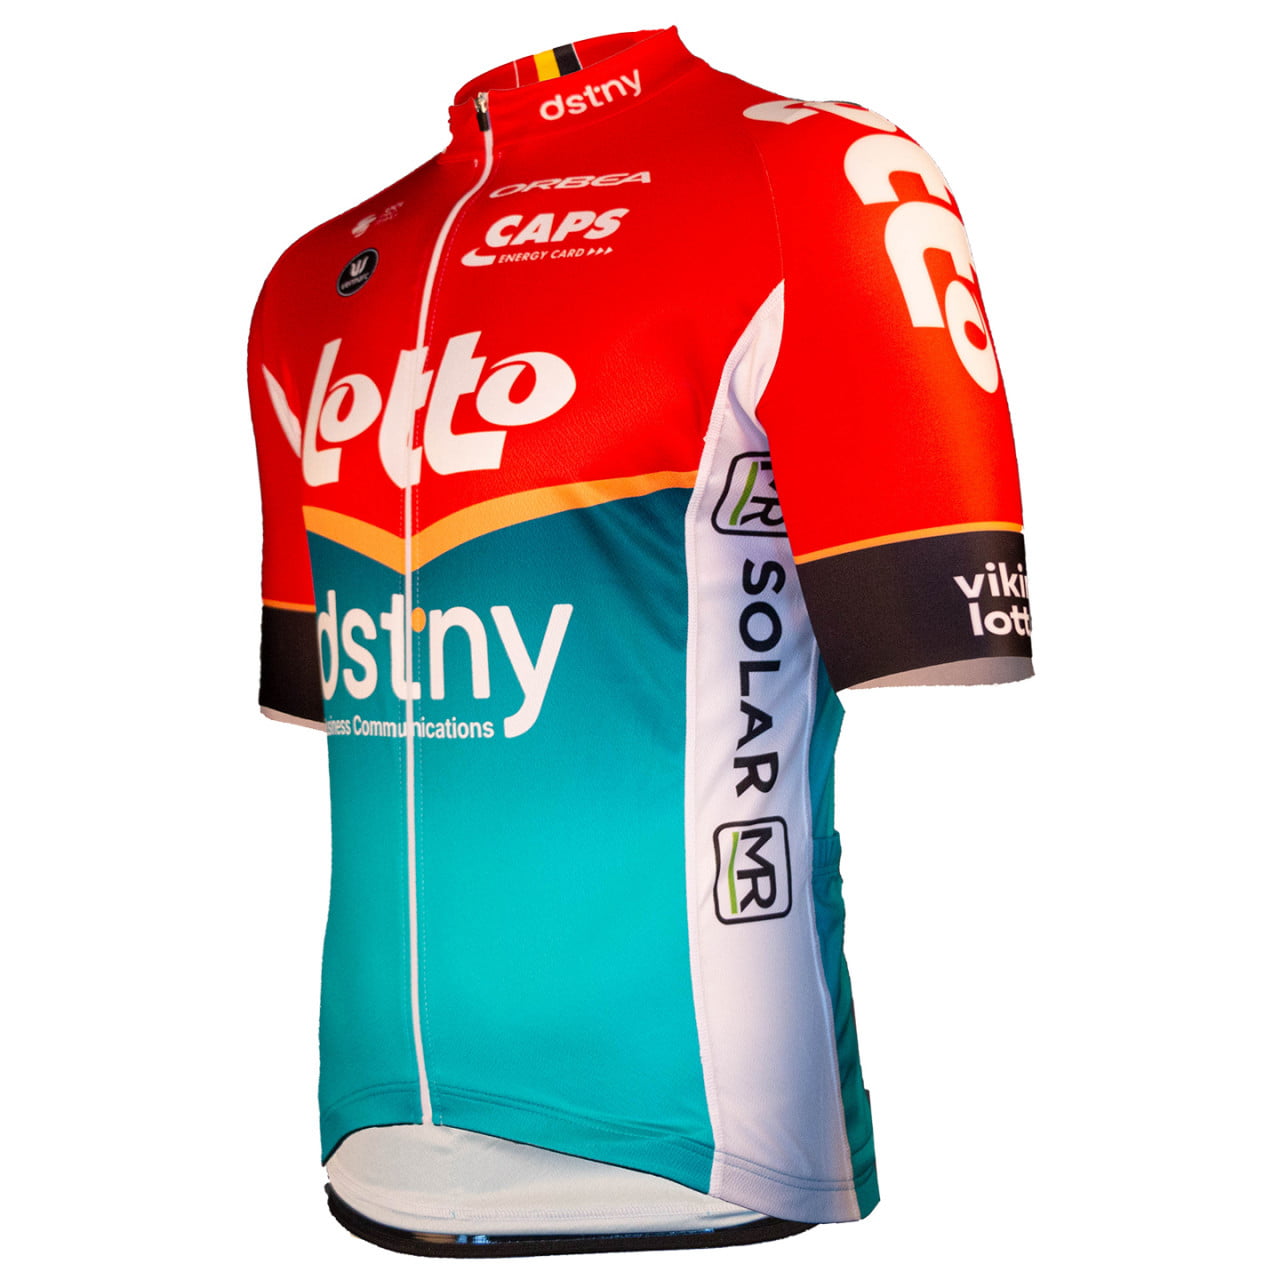 Maillot manches courtes LOTTO DSTNY 2024